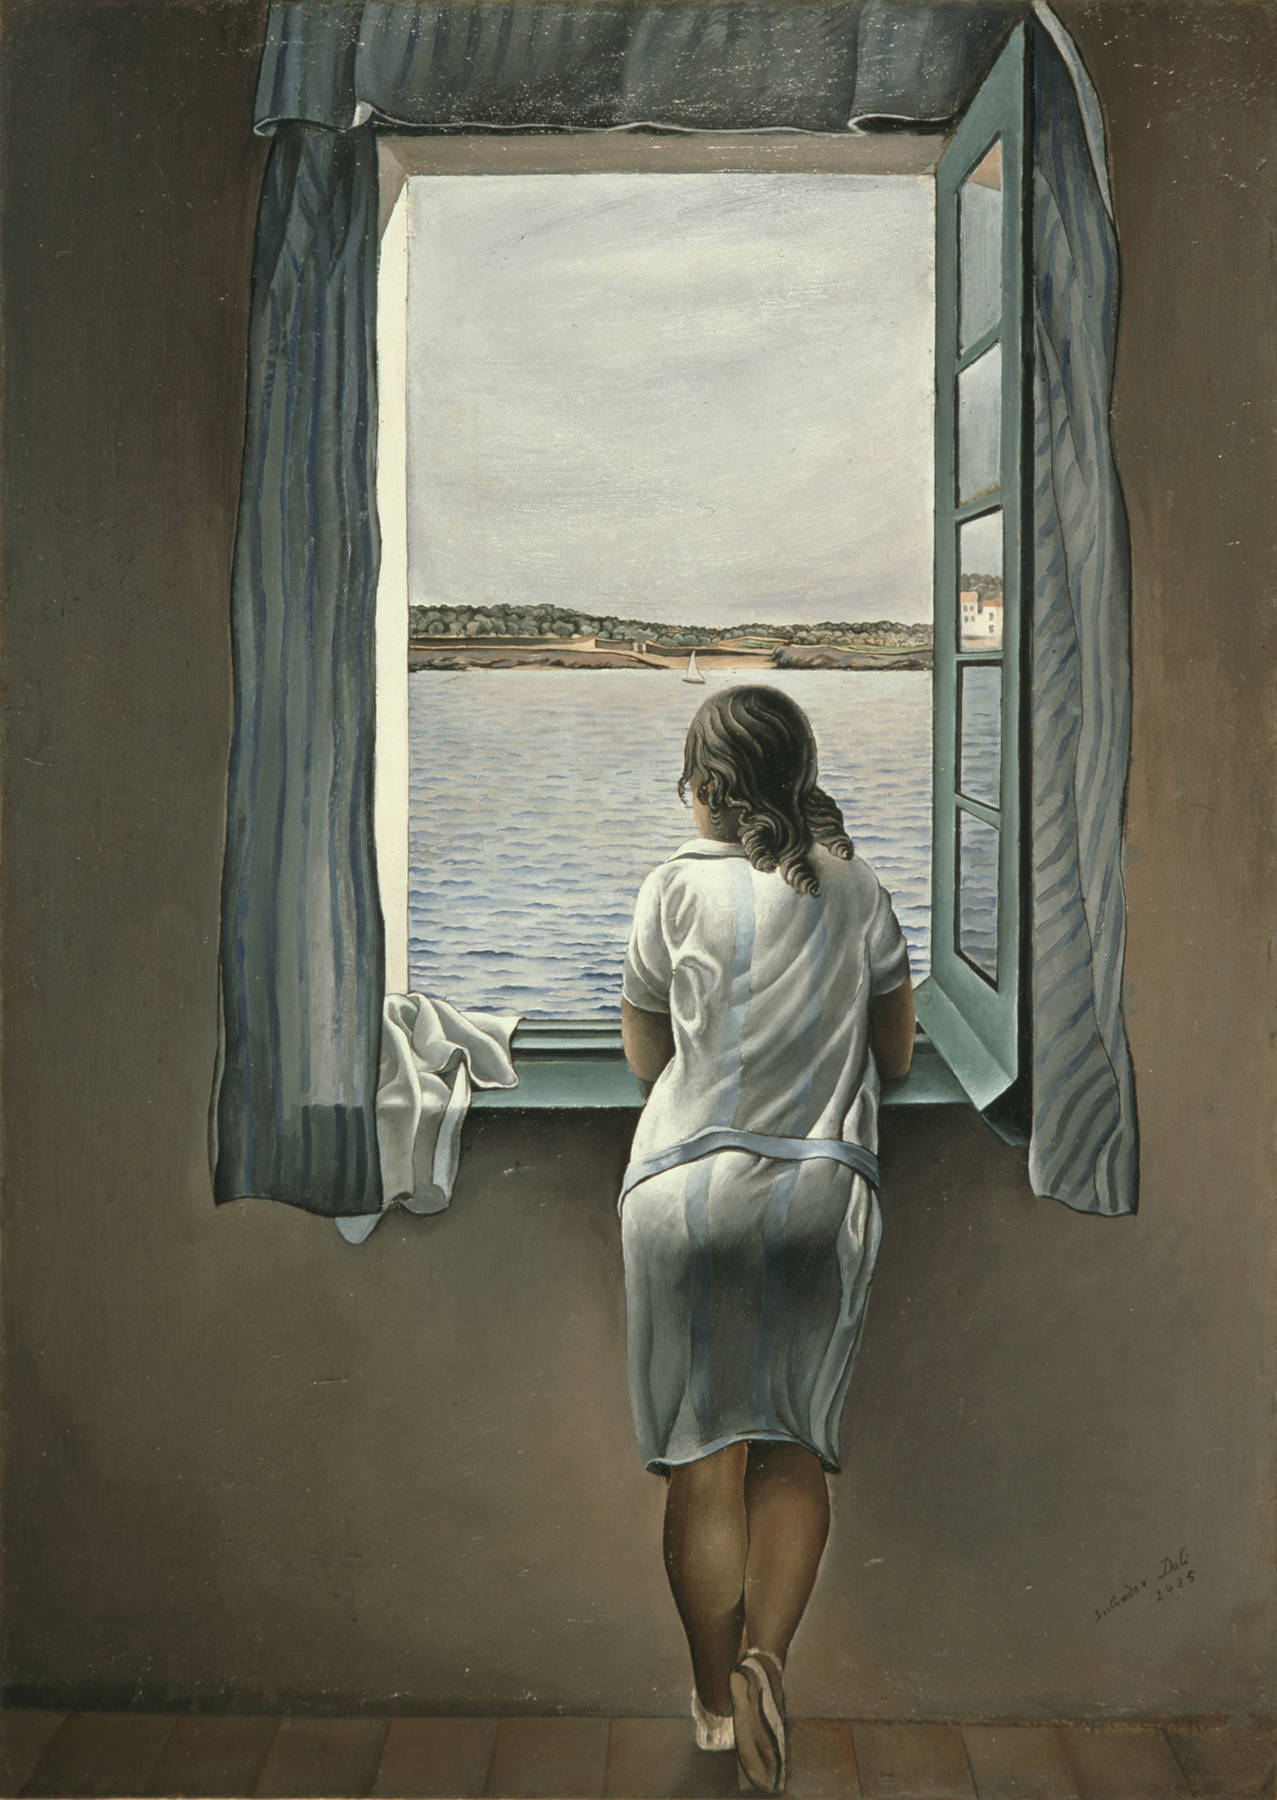 Woman at the Window at Figueres by Salvador Dalí - 1926 - - private collectionnameprivate collection